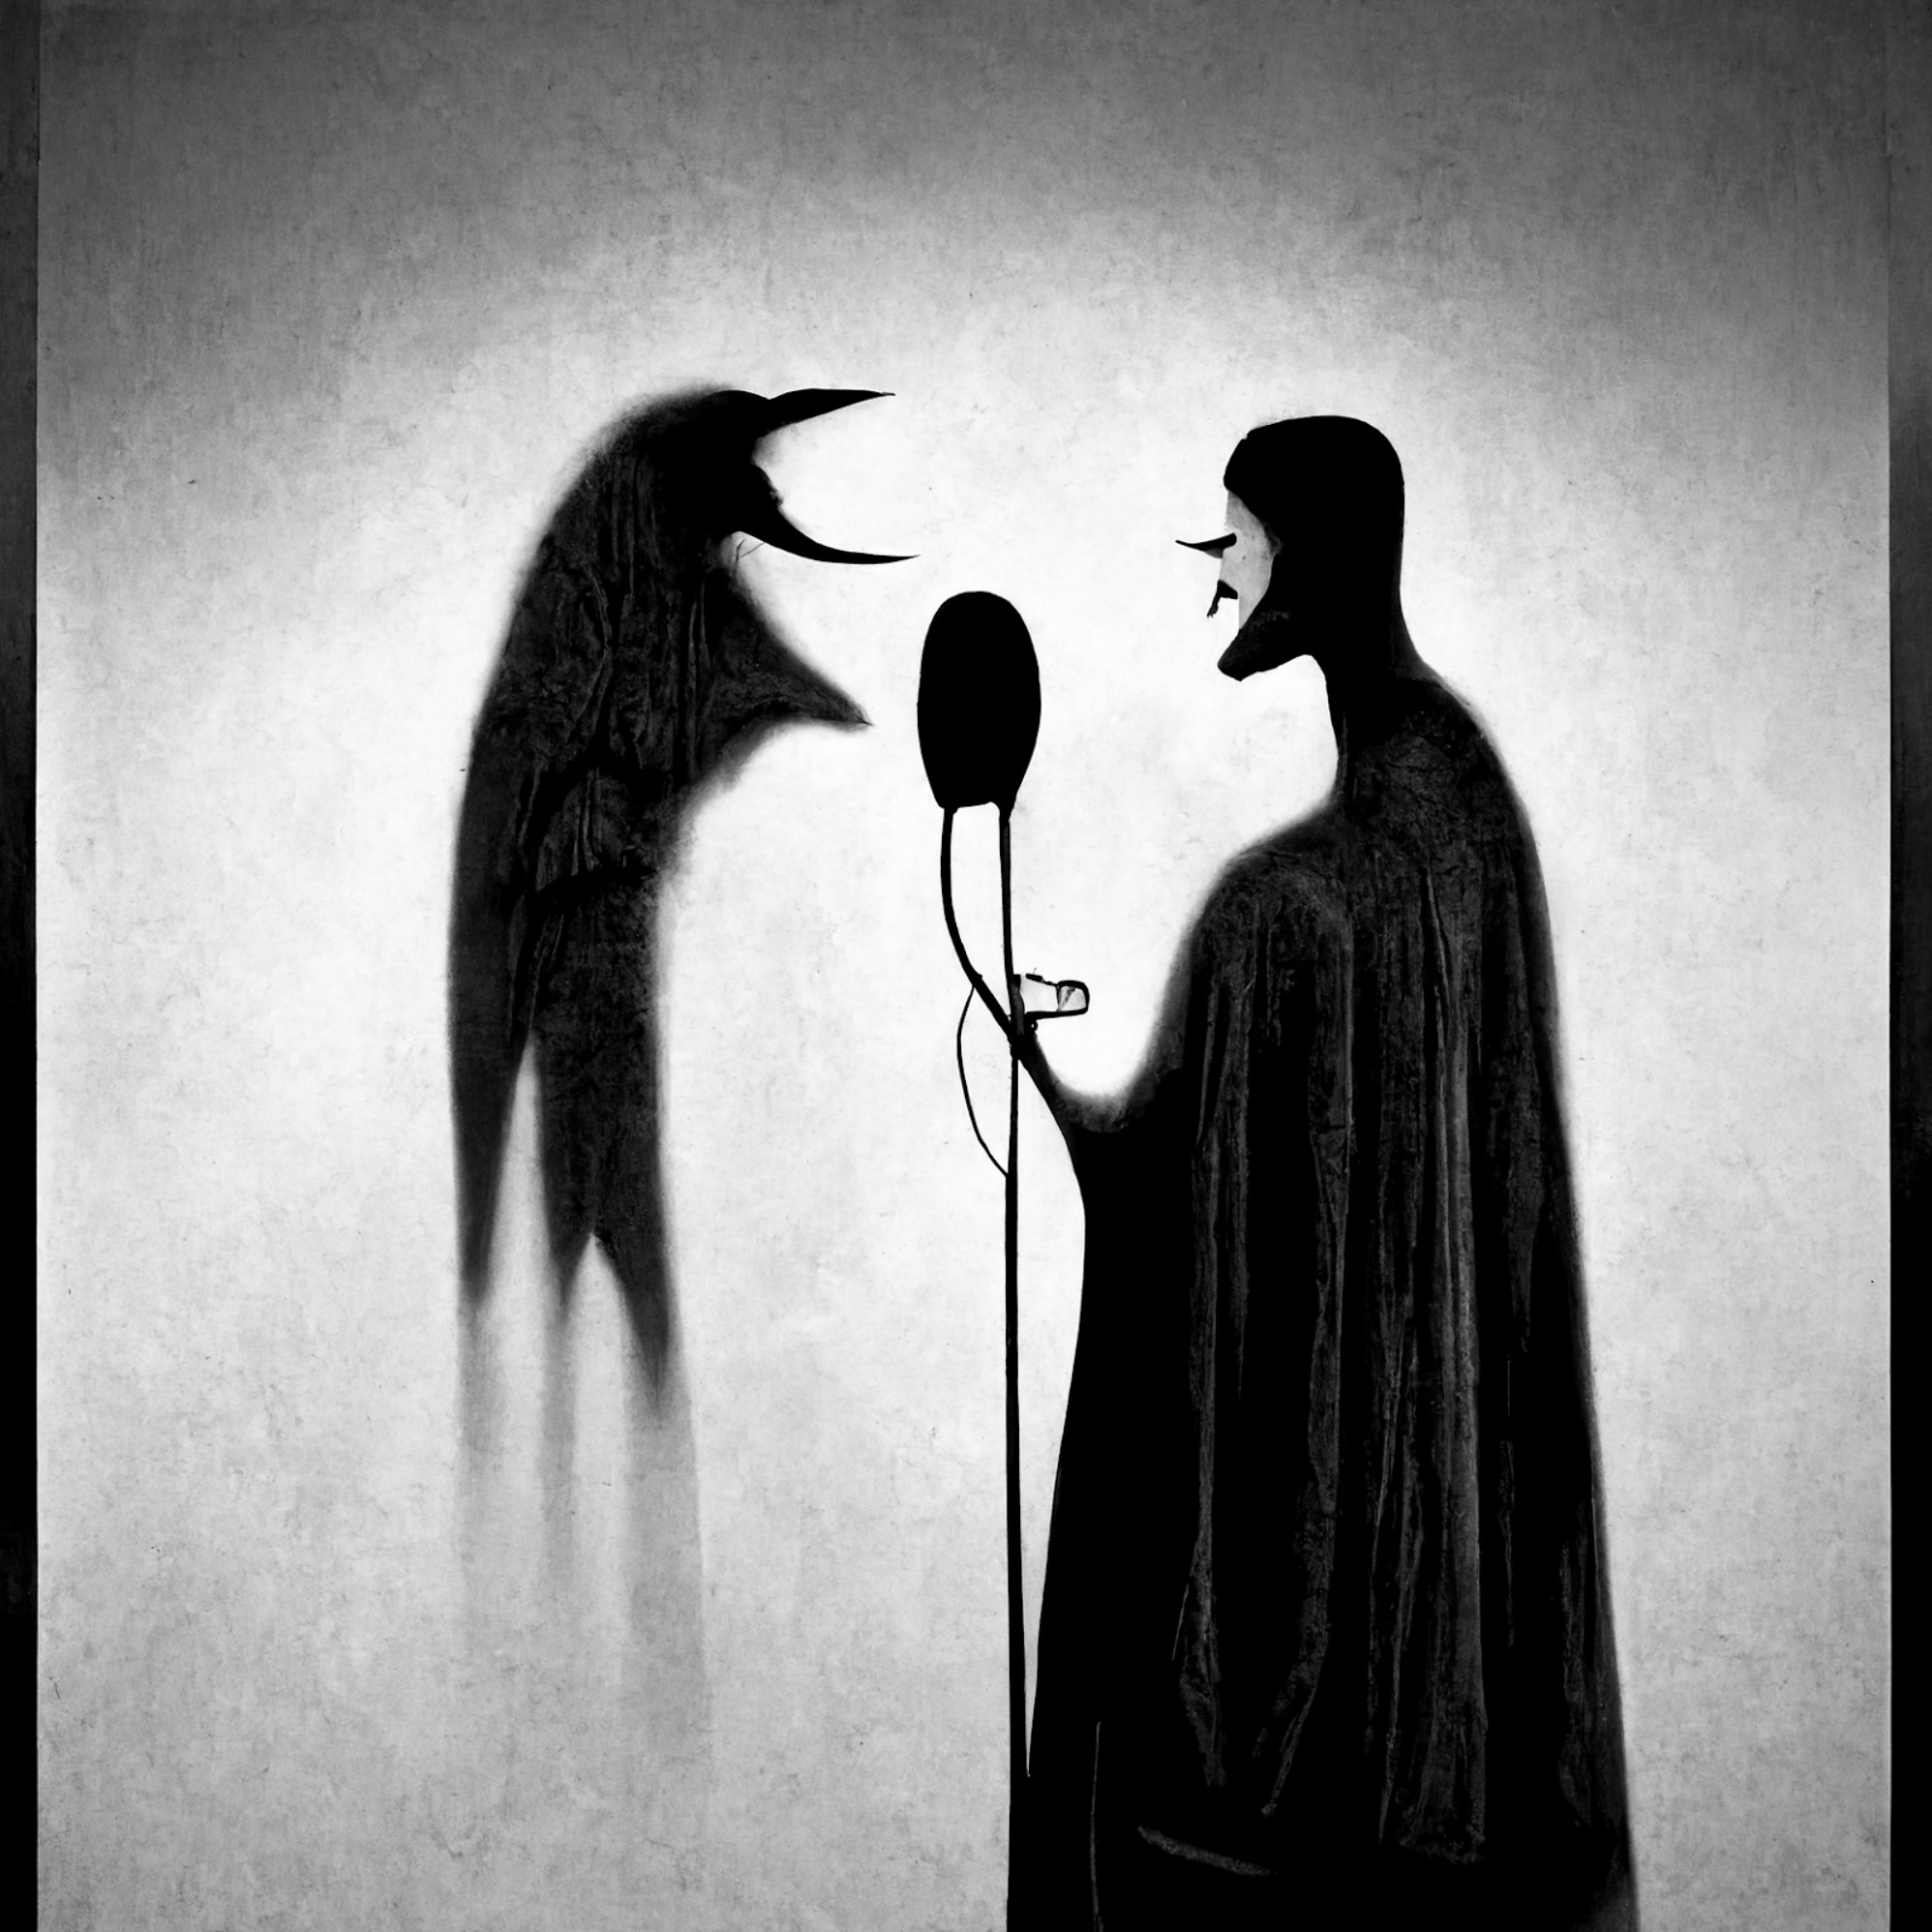 Stylized person at microphone, facing their own shadow